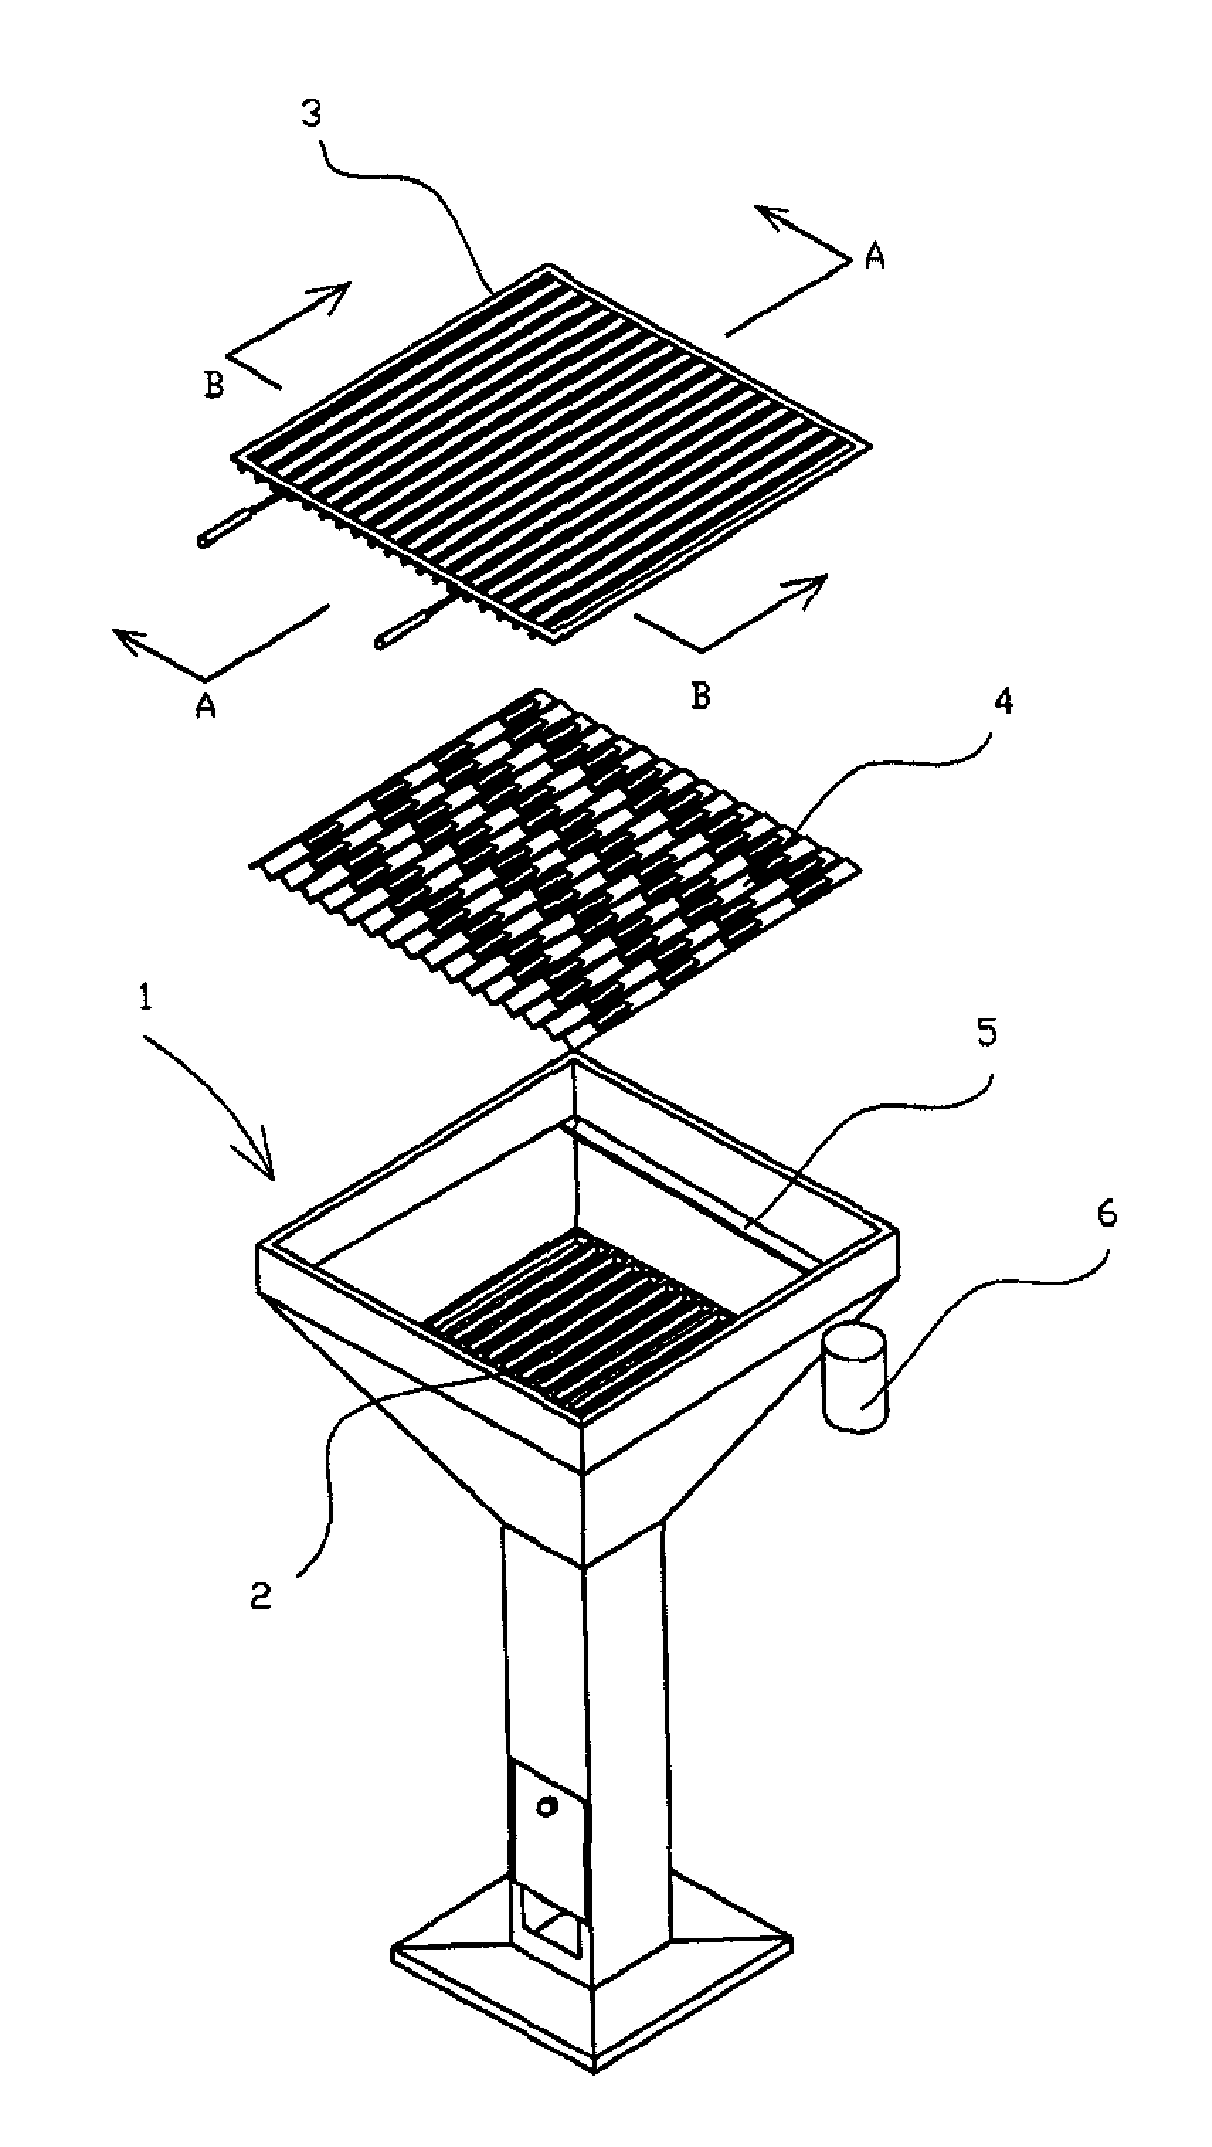 Barbecue oven